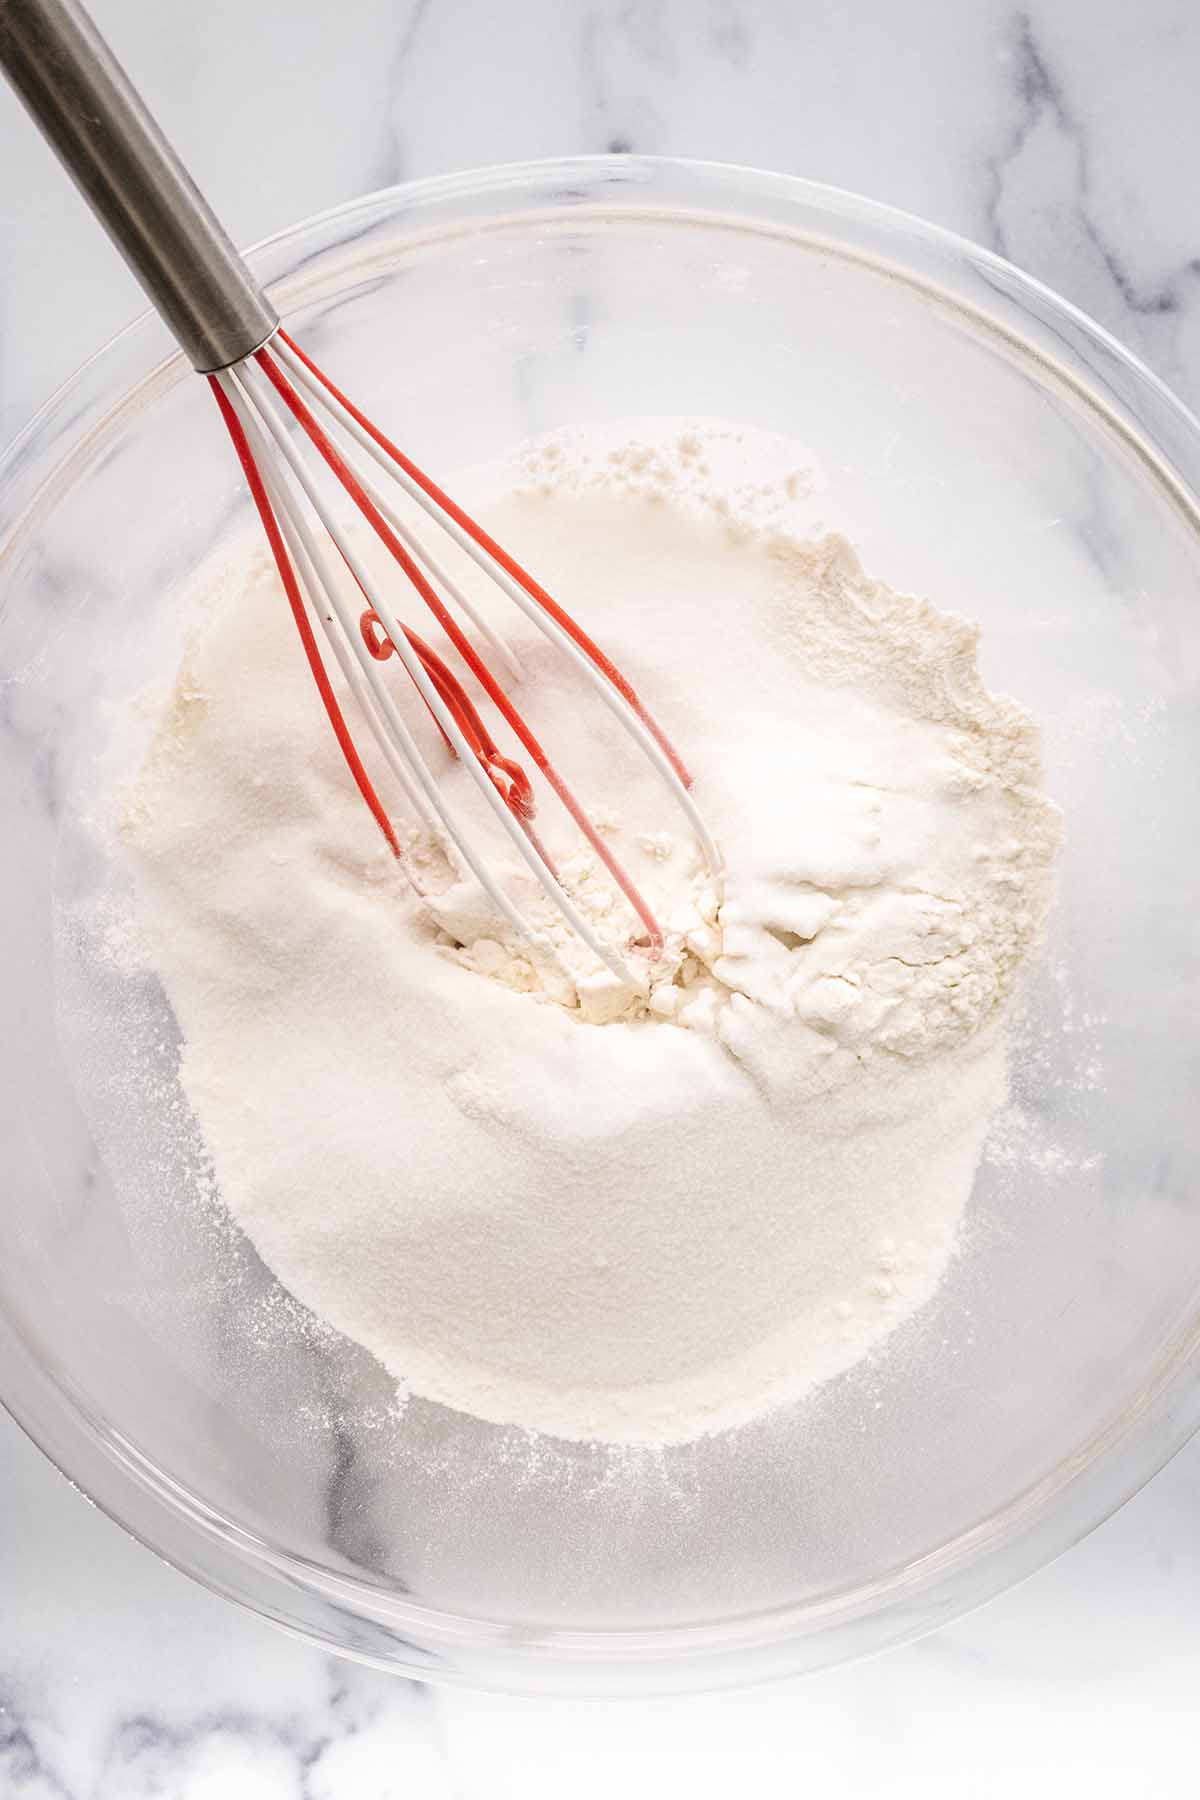 Overhead view of dry ingredients in a large glass bowl with a red and white silicone whisk